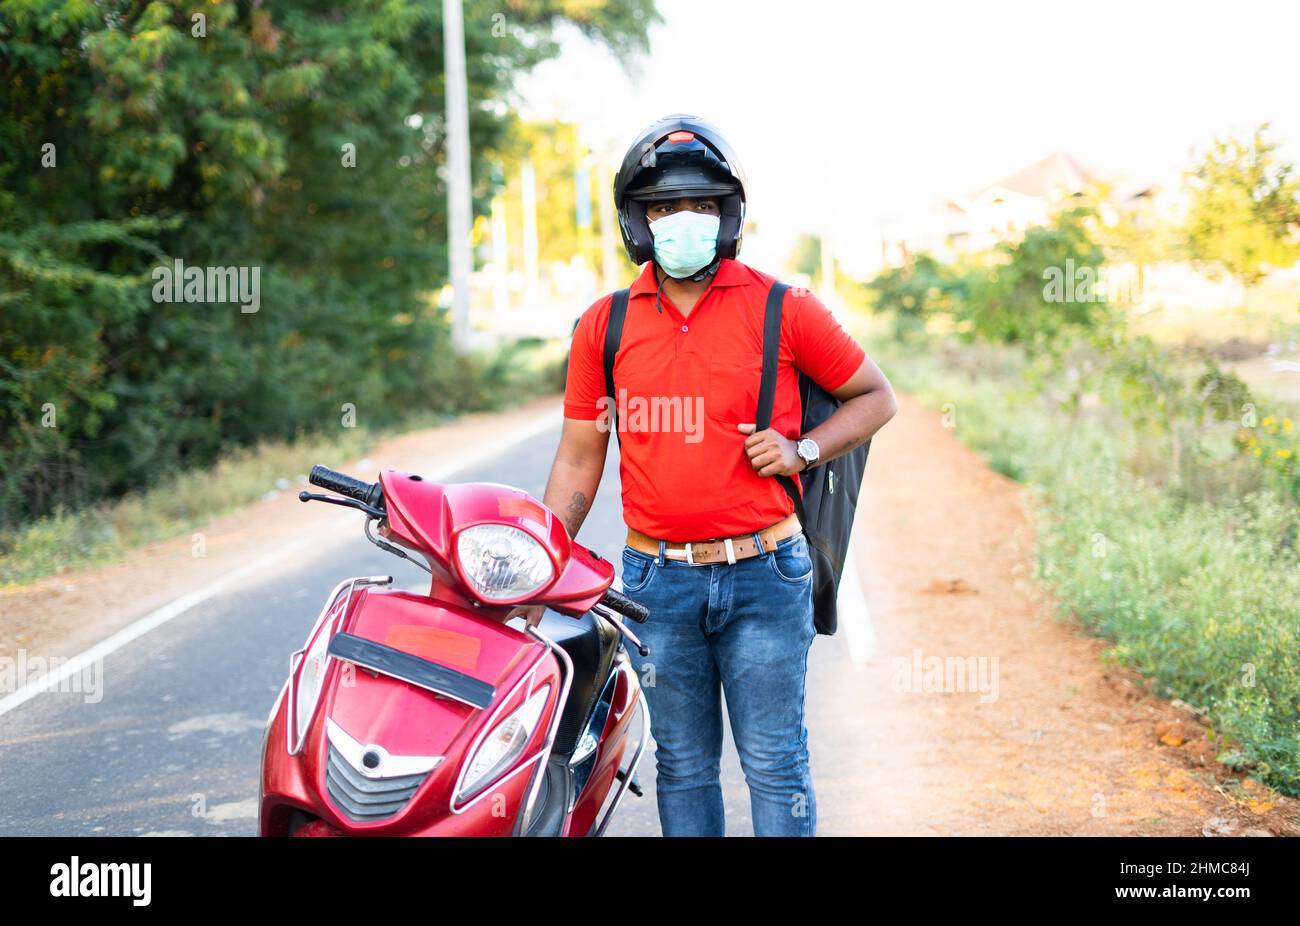 Delivery boy medical face mask coming by standing next to scooter - concept of courier service during coronavirus or covid-19 pandemic with safety Stock Photo